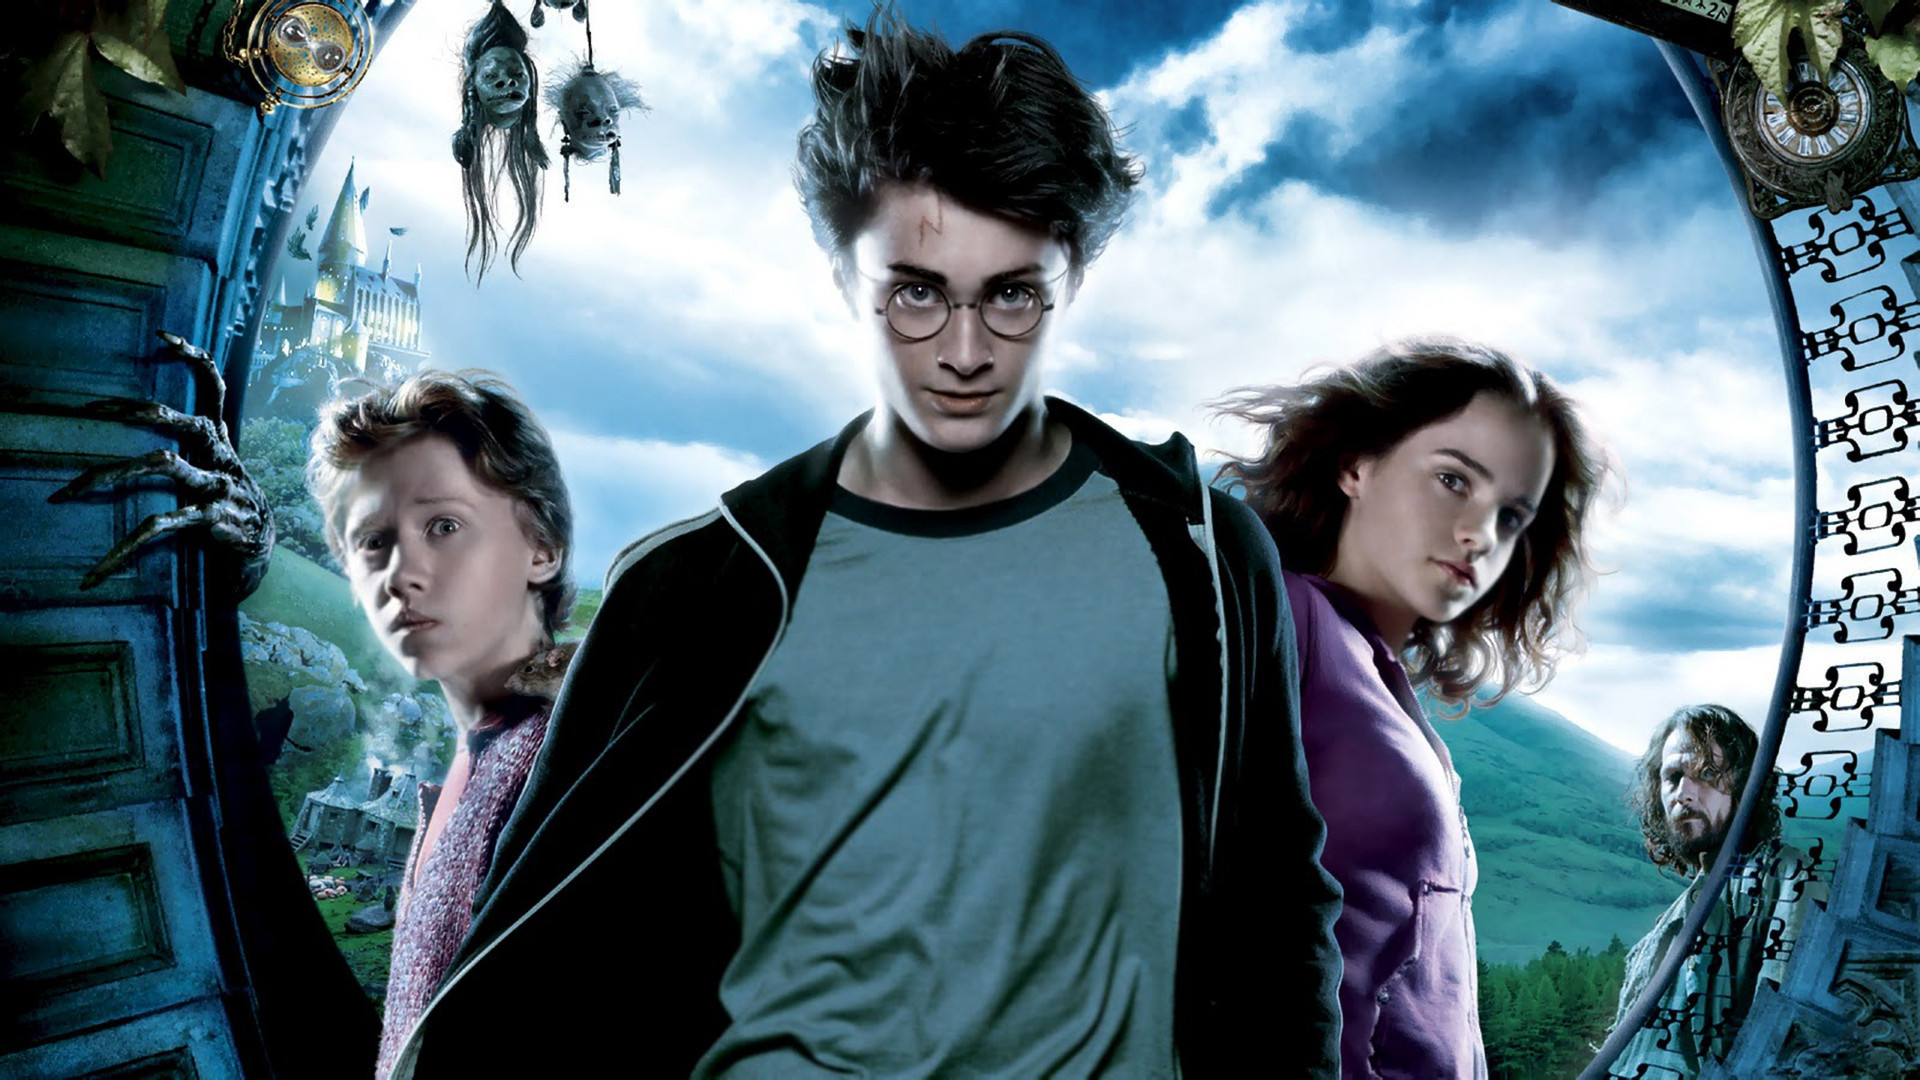 Before the filming of 'Harry Potter and the Prisoner of Azkaban' (2004), the director Alfonso Cuarón asked the three main actors to write an essay about their characters.<p><a href="https://www.msn.com/en-us/community/channel/vid-7xx8mnucu55yw63we9va2gwr7uihbxwc68fxqp25x6tg4ftibpra?cvid=94631541bc0f4f89bfd59158d696ad7e">Follow us and access great exclusive content every day</a></p>